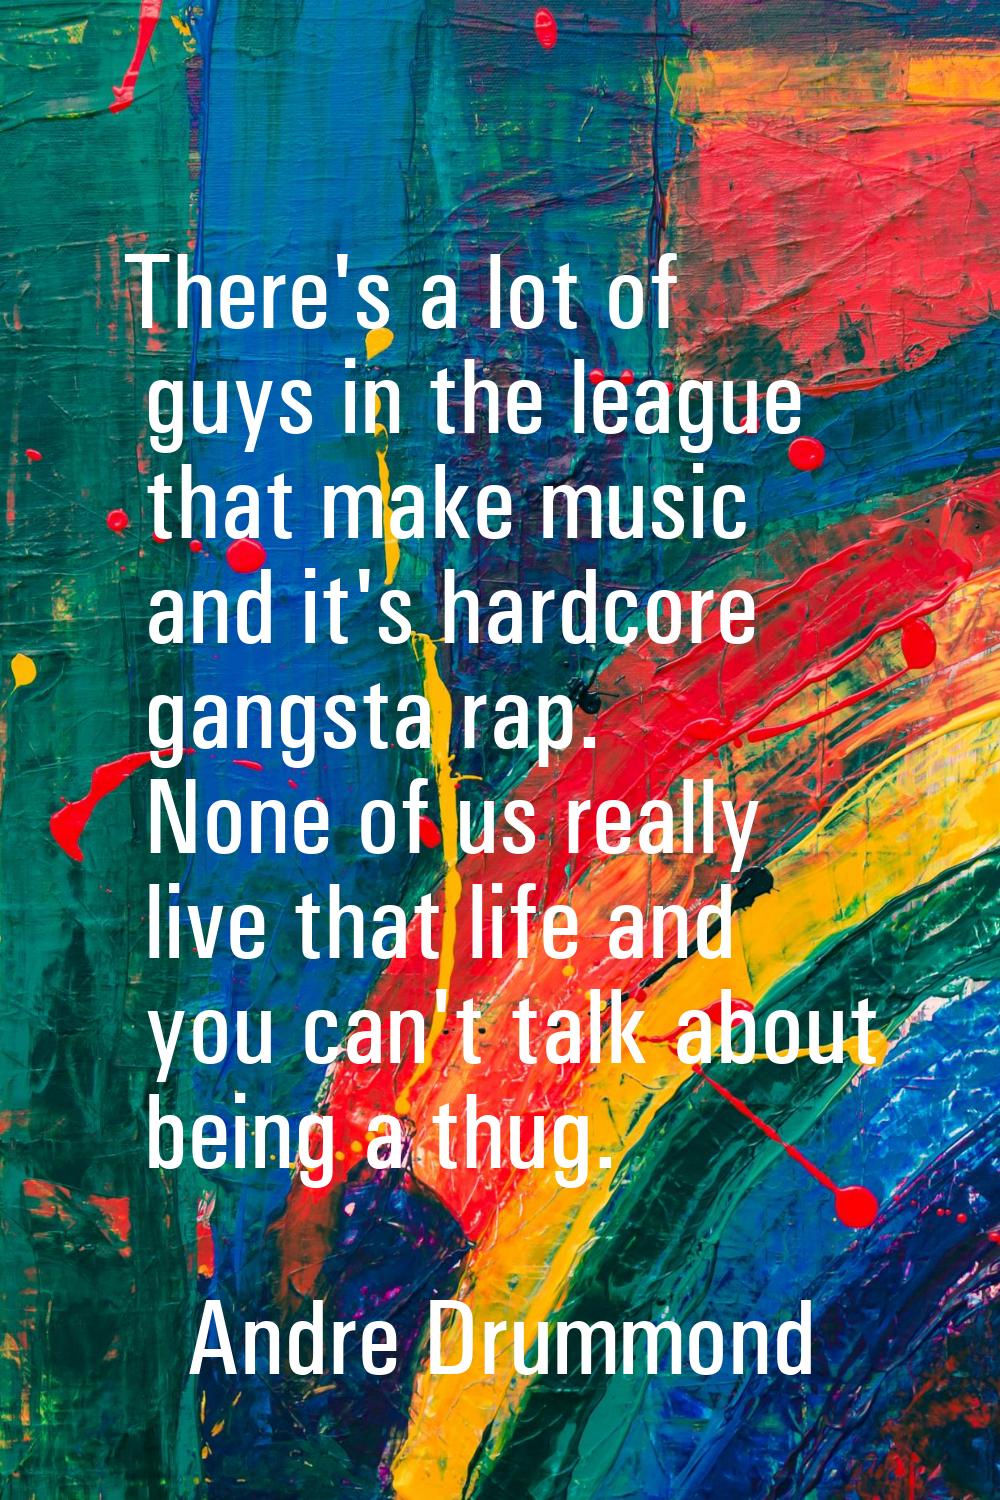 There's a lot of guys in the league that make music and it's hardcore gangsta rap. None of us reall